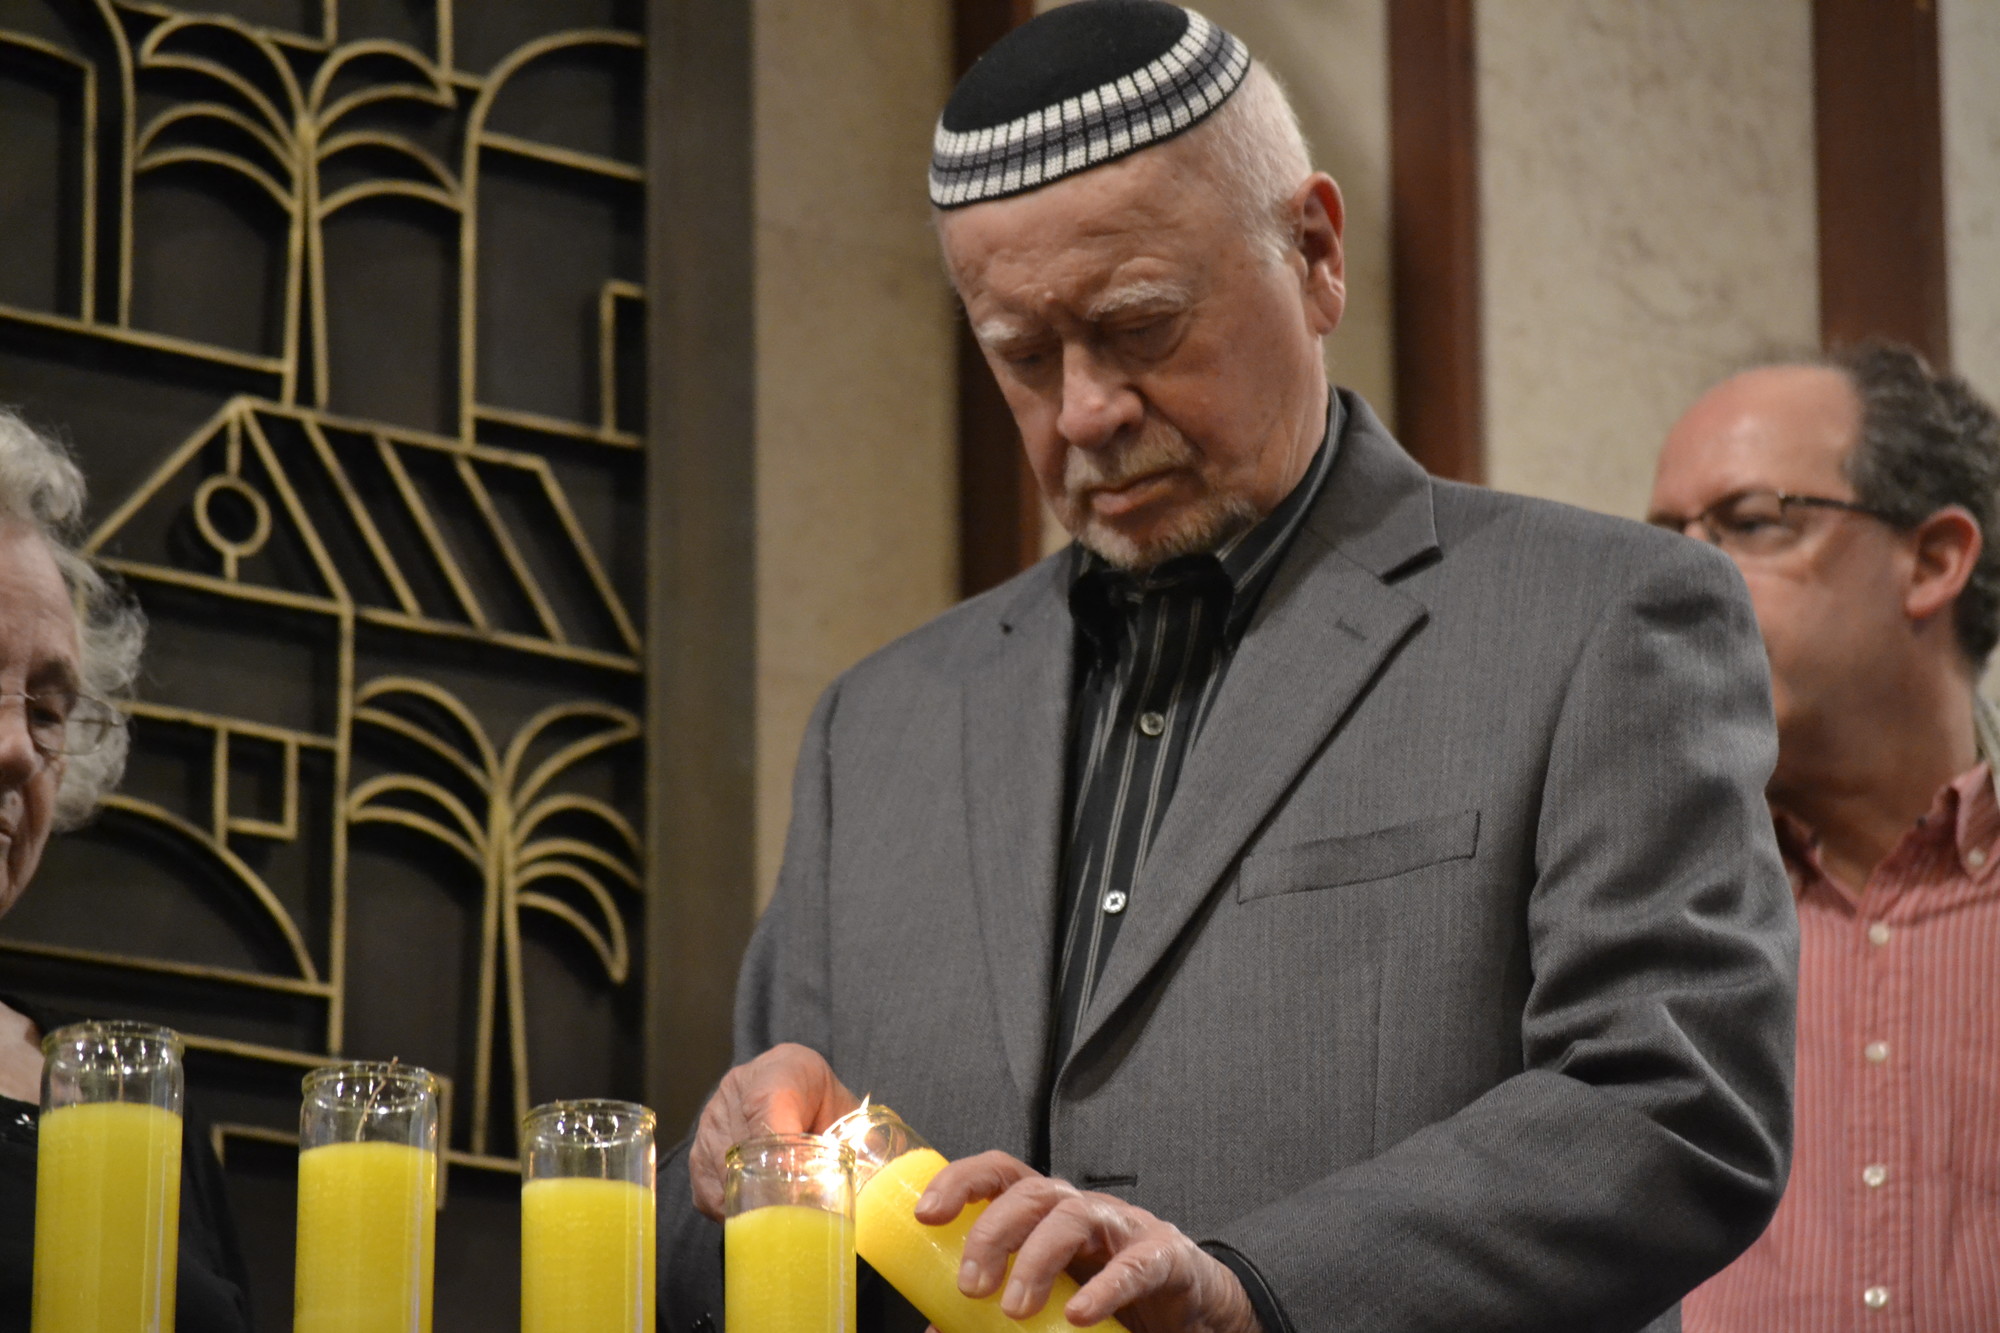 Alex Konstantyn, who survived the Holocaust by hiding out in the Polish countryside, at the East Meadow Jewish Center’s Yom HaShoah service on April 15.